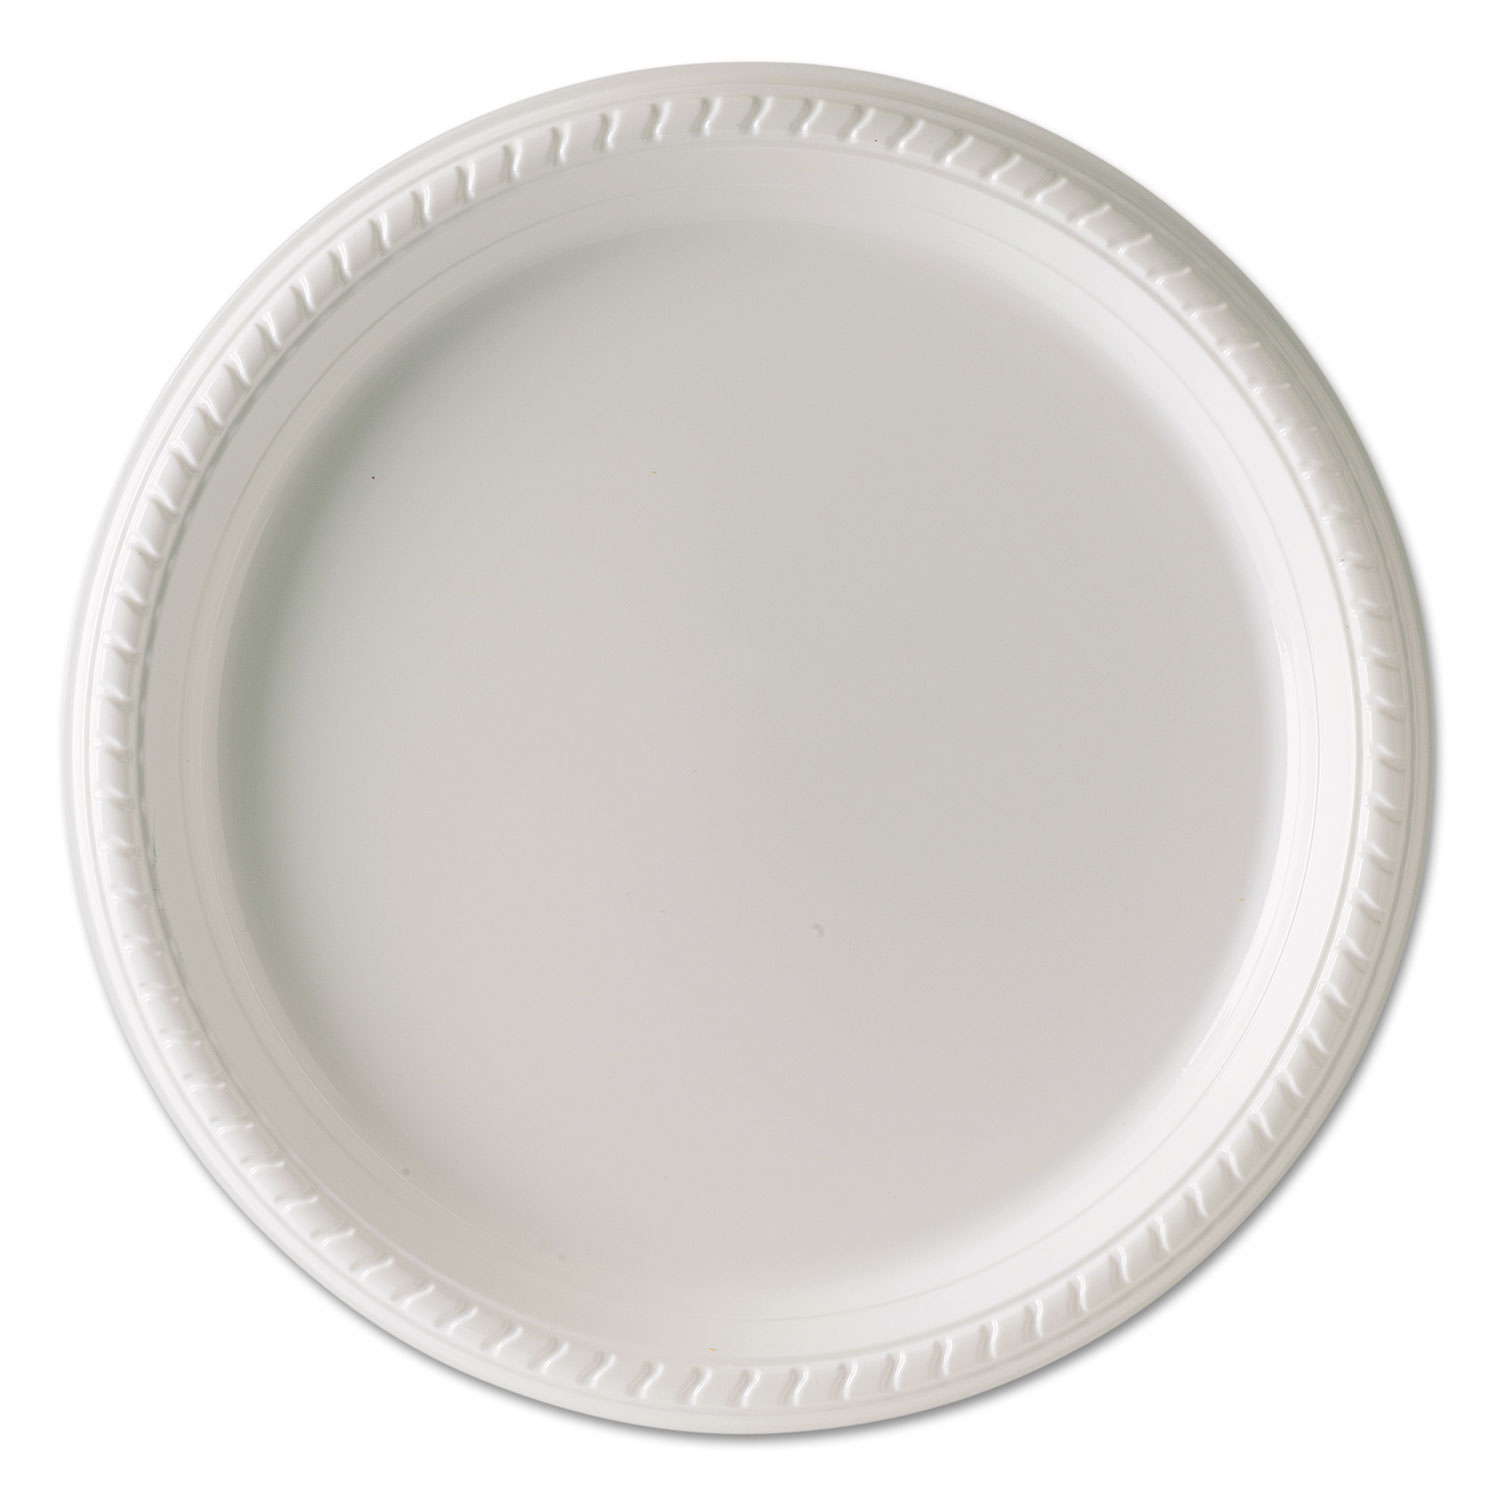  Dart PS15W-0099 Plastic Plates, 10 1/4 Inches, White, Round, 25/Pack, 20 Packs/Carton (SCCPS15W) 